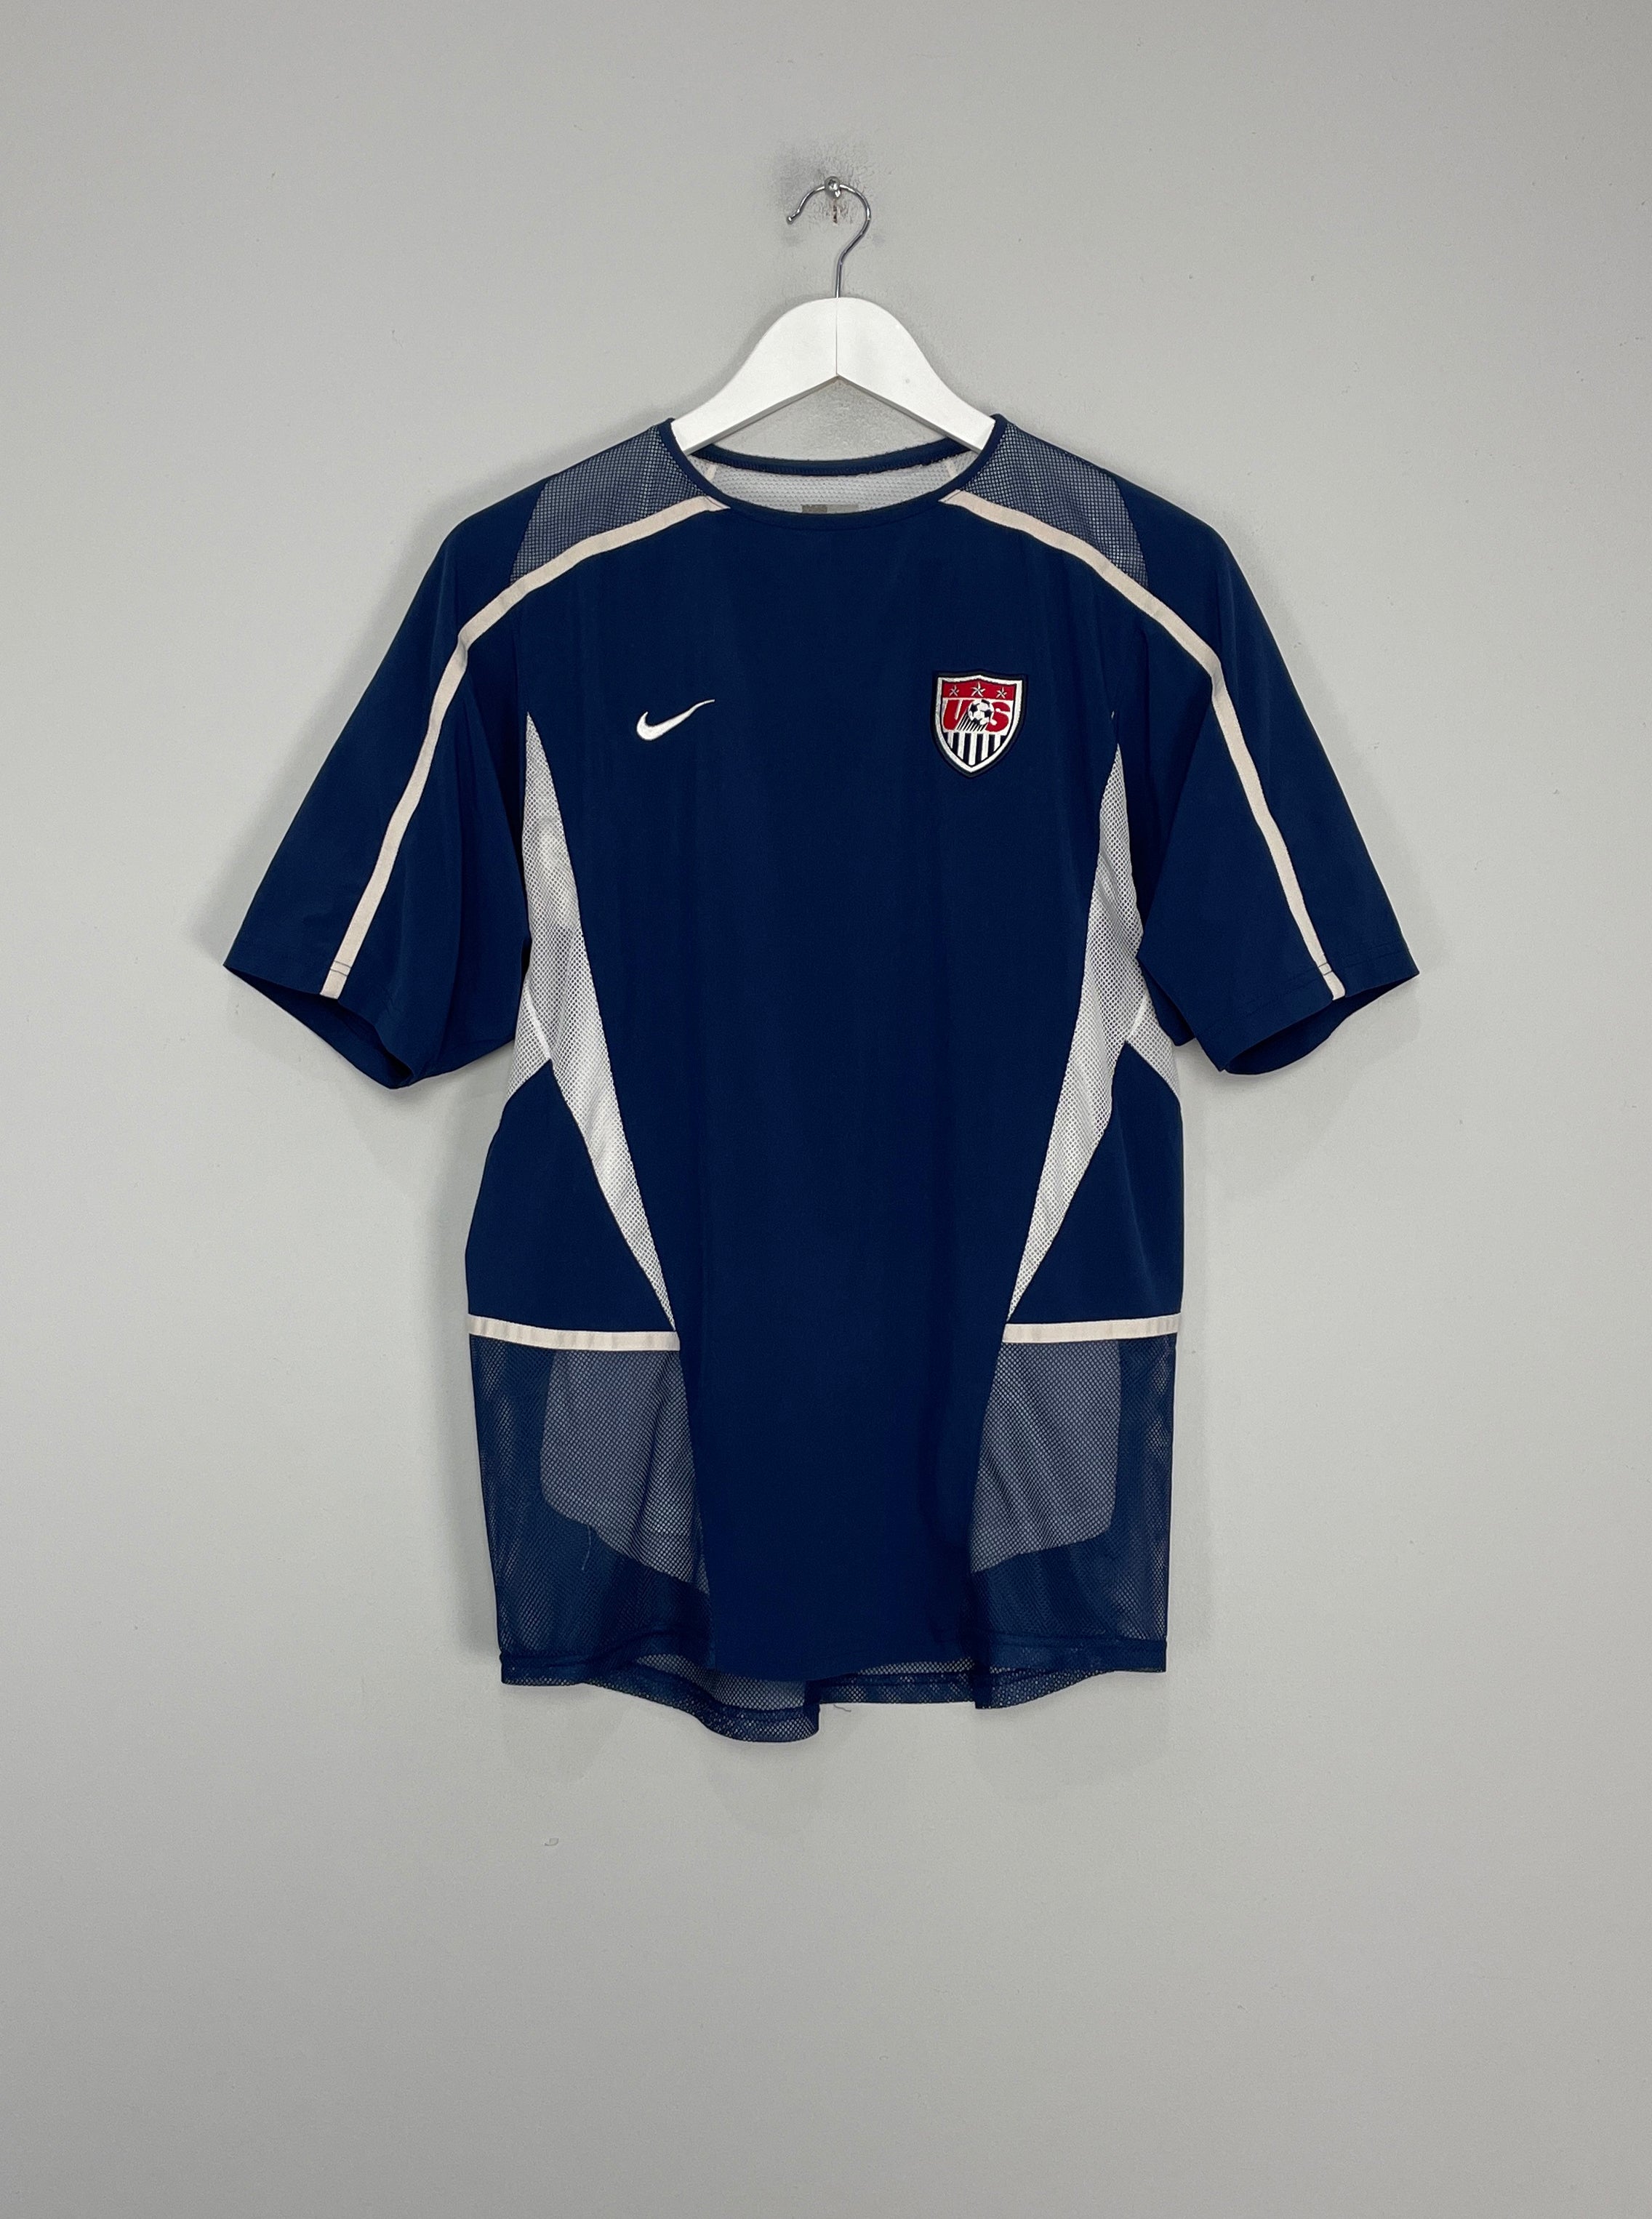 2002 Nike Red/White/Blue Team USA XXL Jersey - clothing